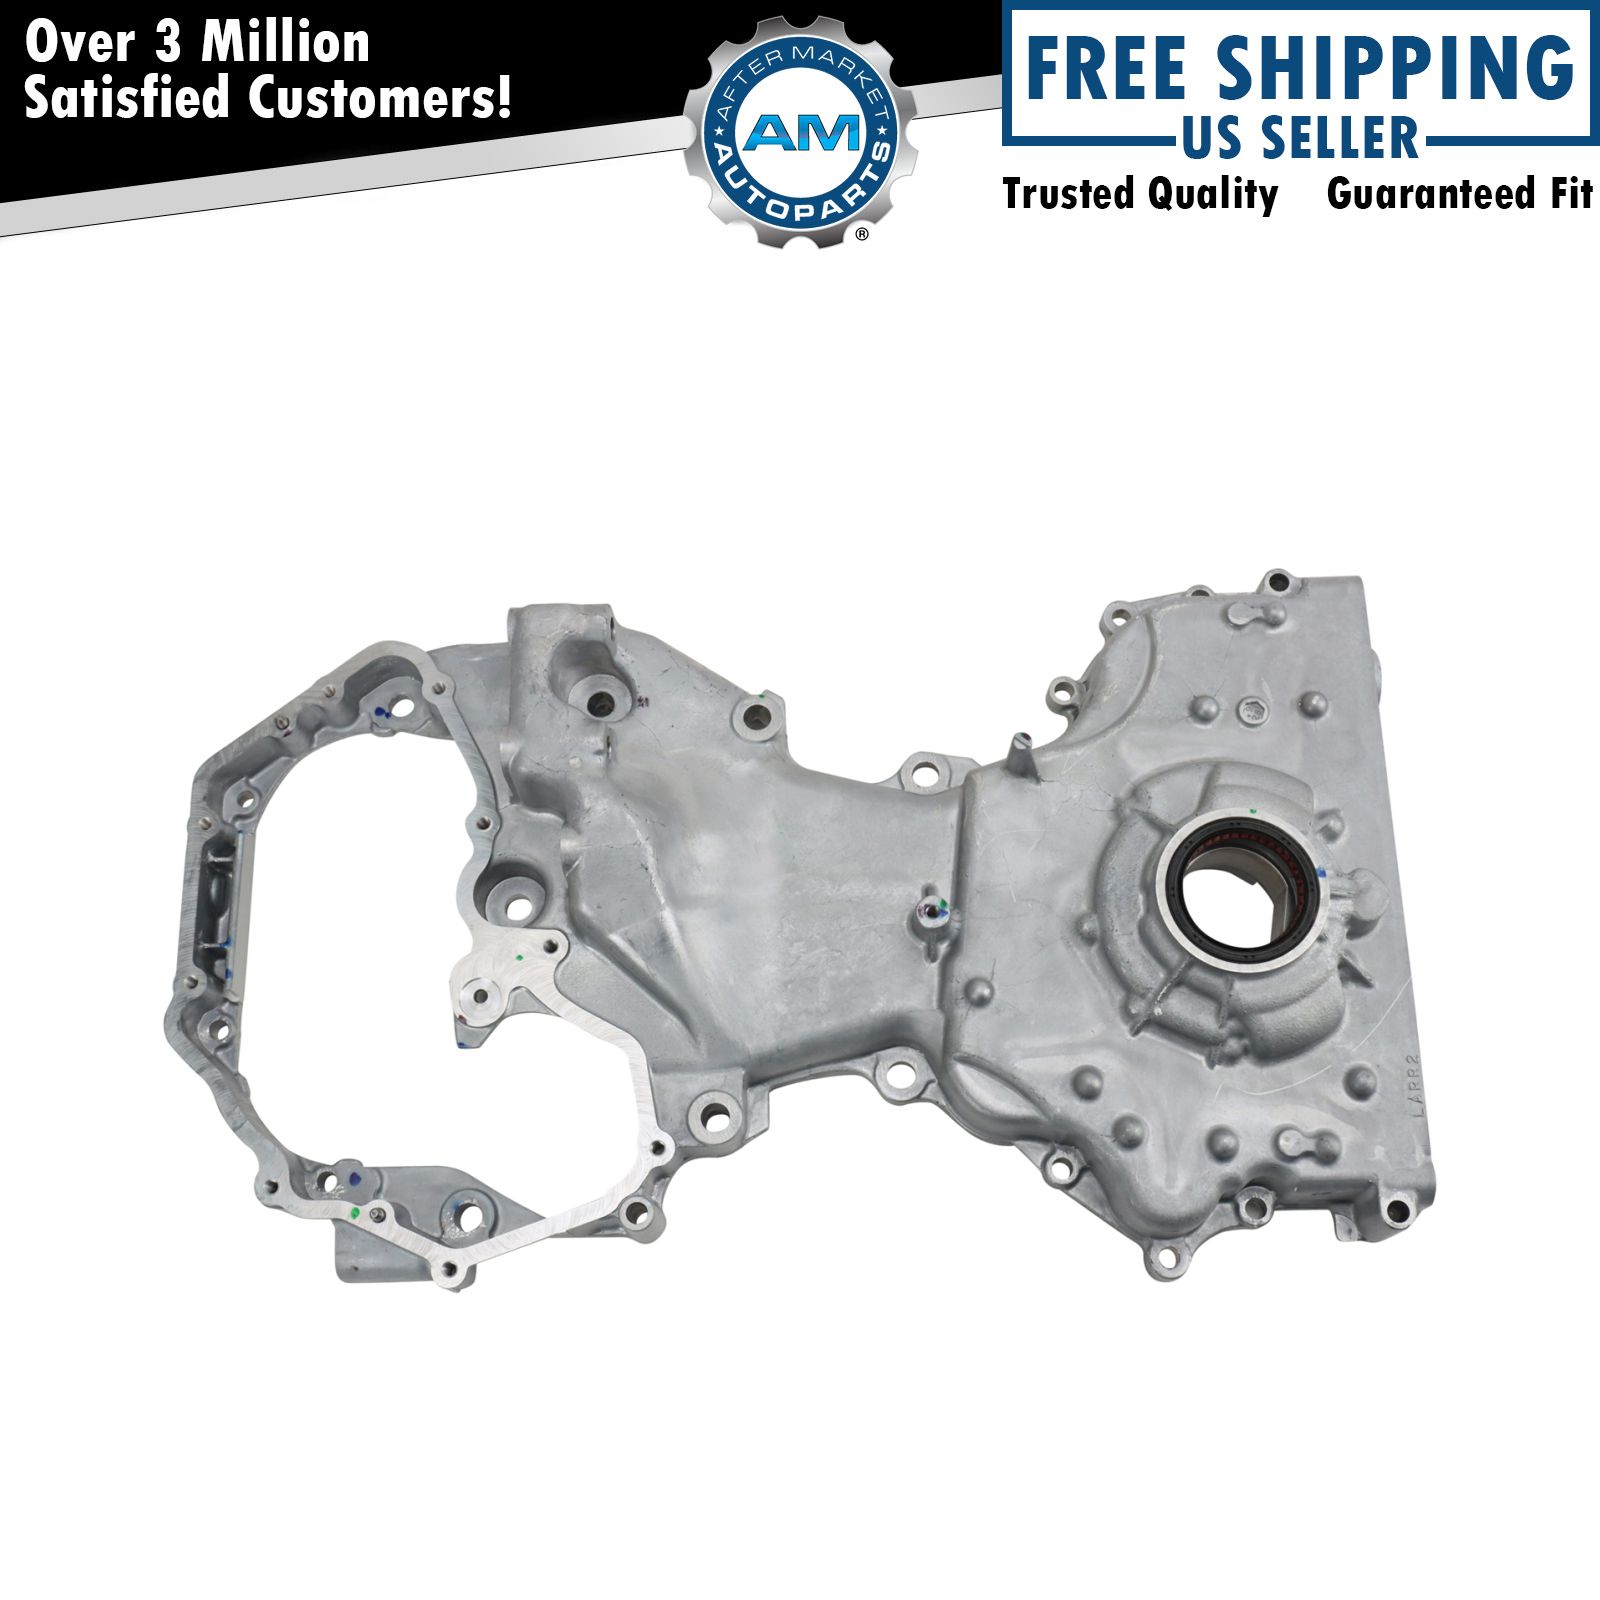 Engine Oil Pump Cover Fits 2007-2013 Nissan Altima